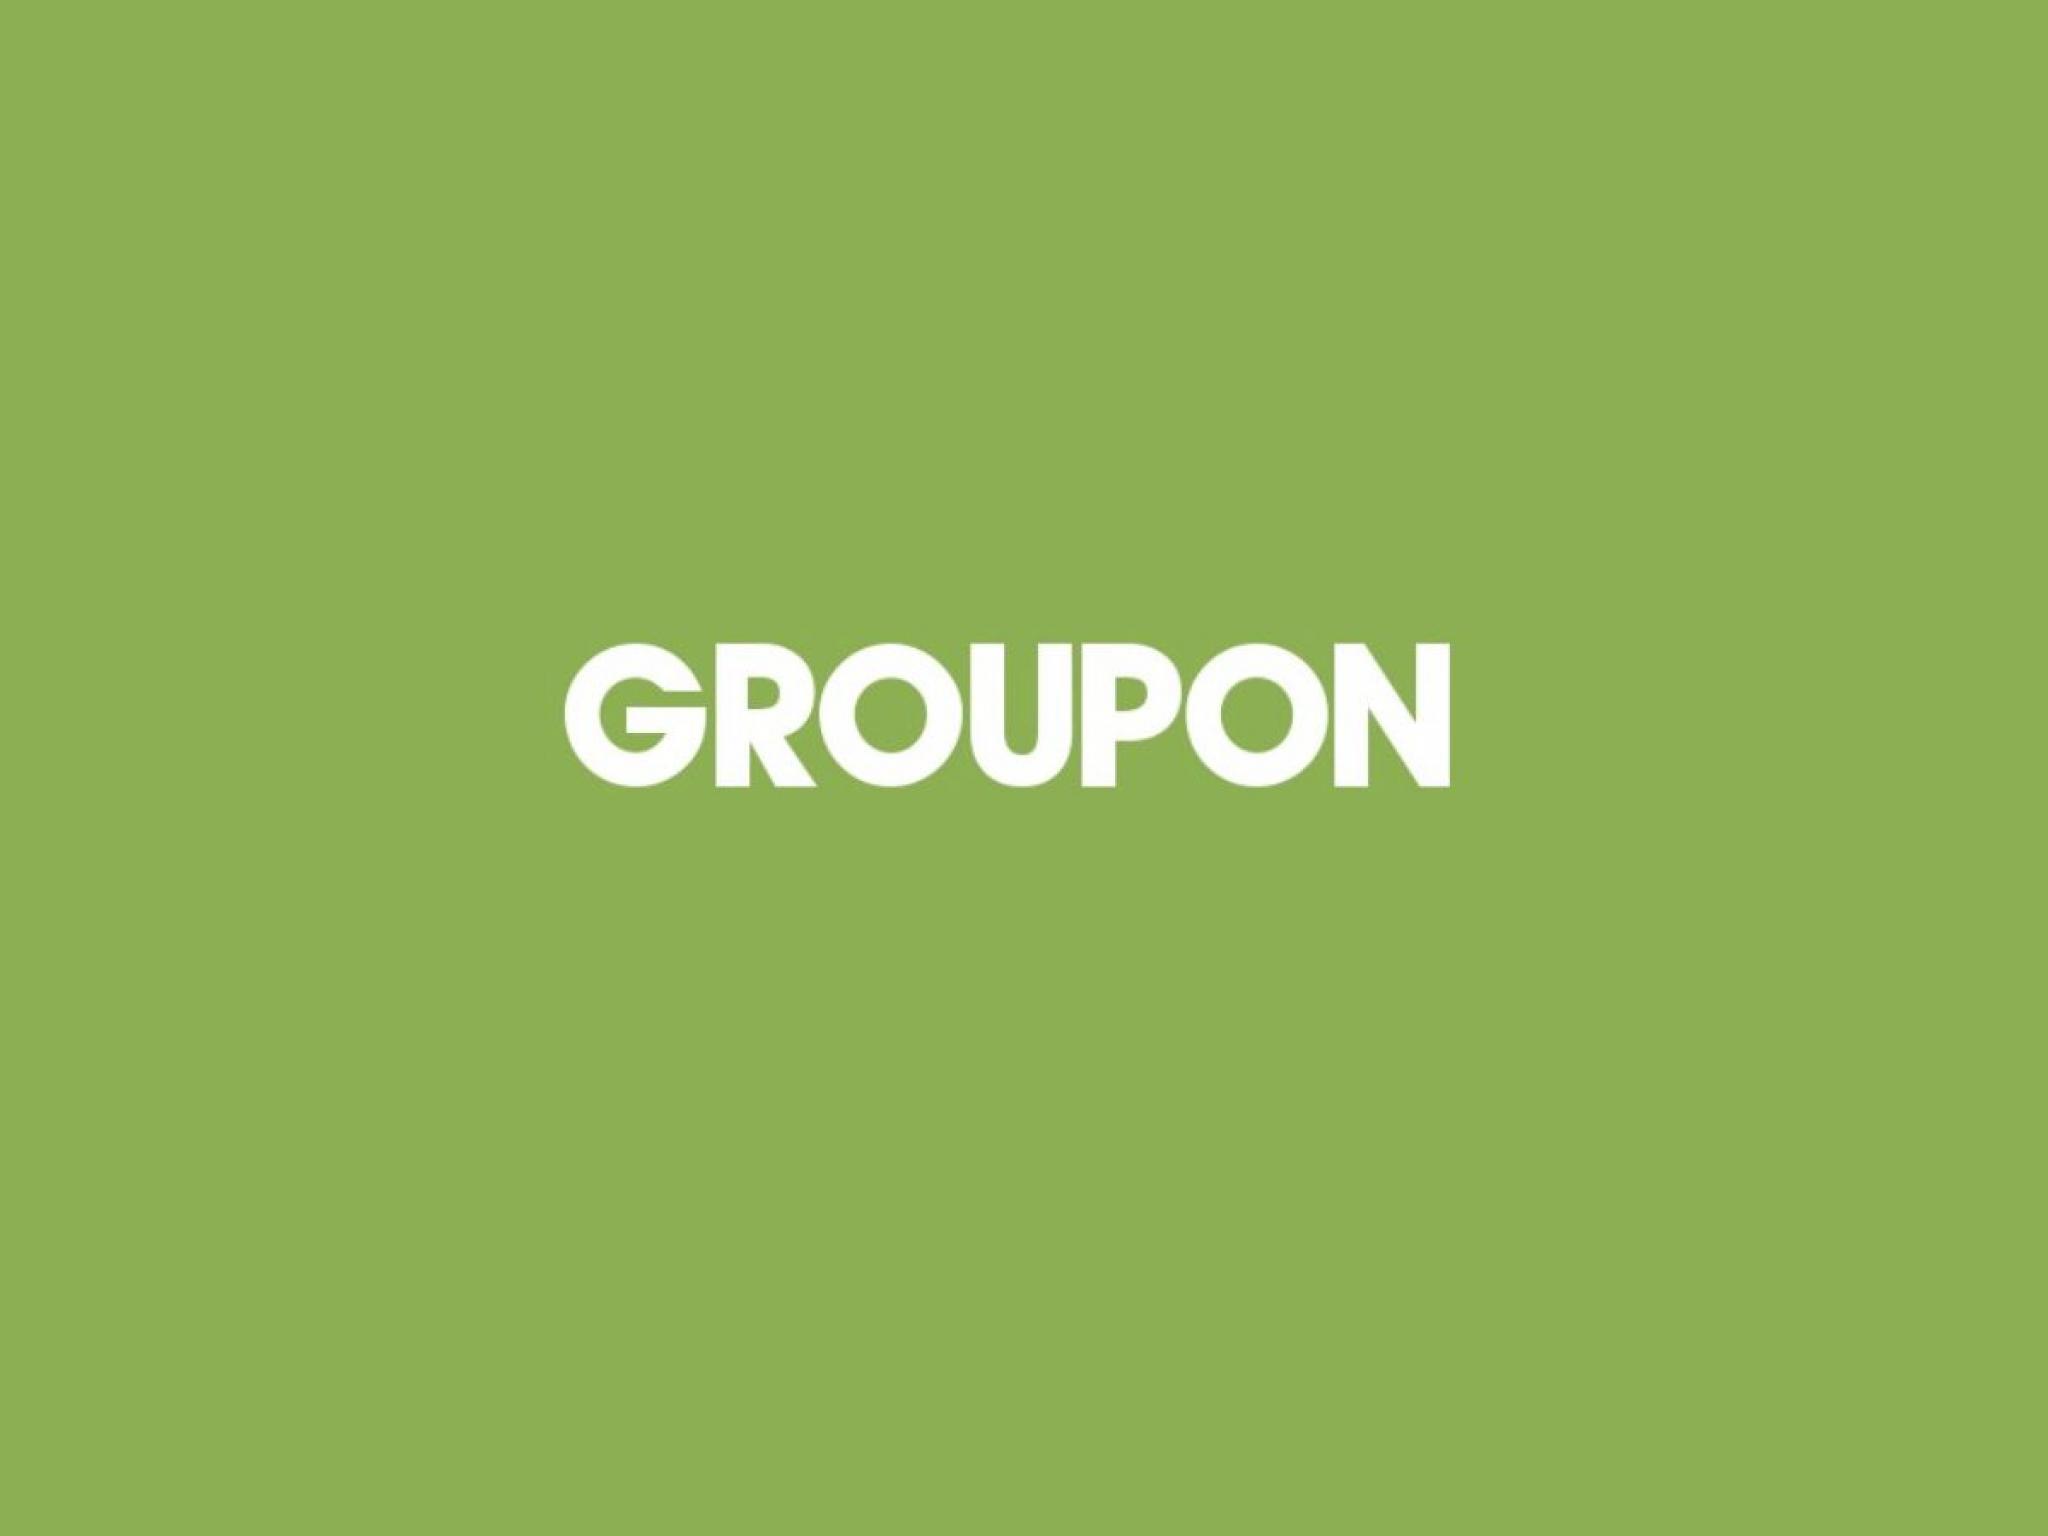  why-groupon-shares-are-trading-lower-by-22-here-are-other-stocks-moving-in-thursdays-mid-day-session 